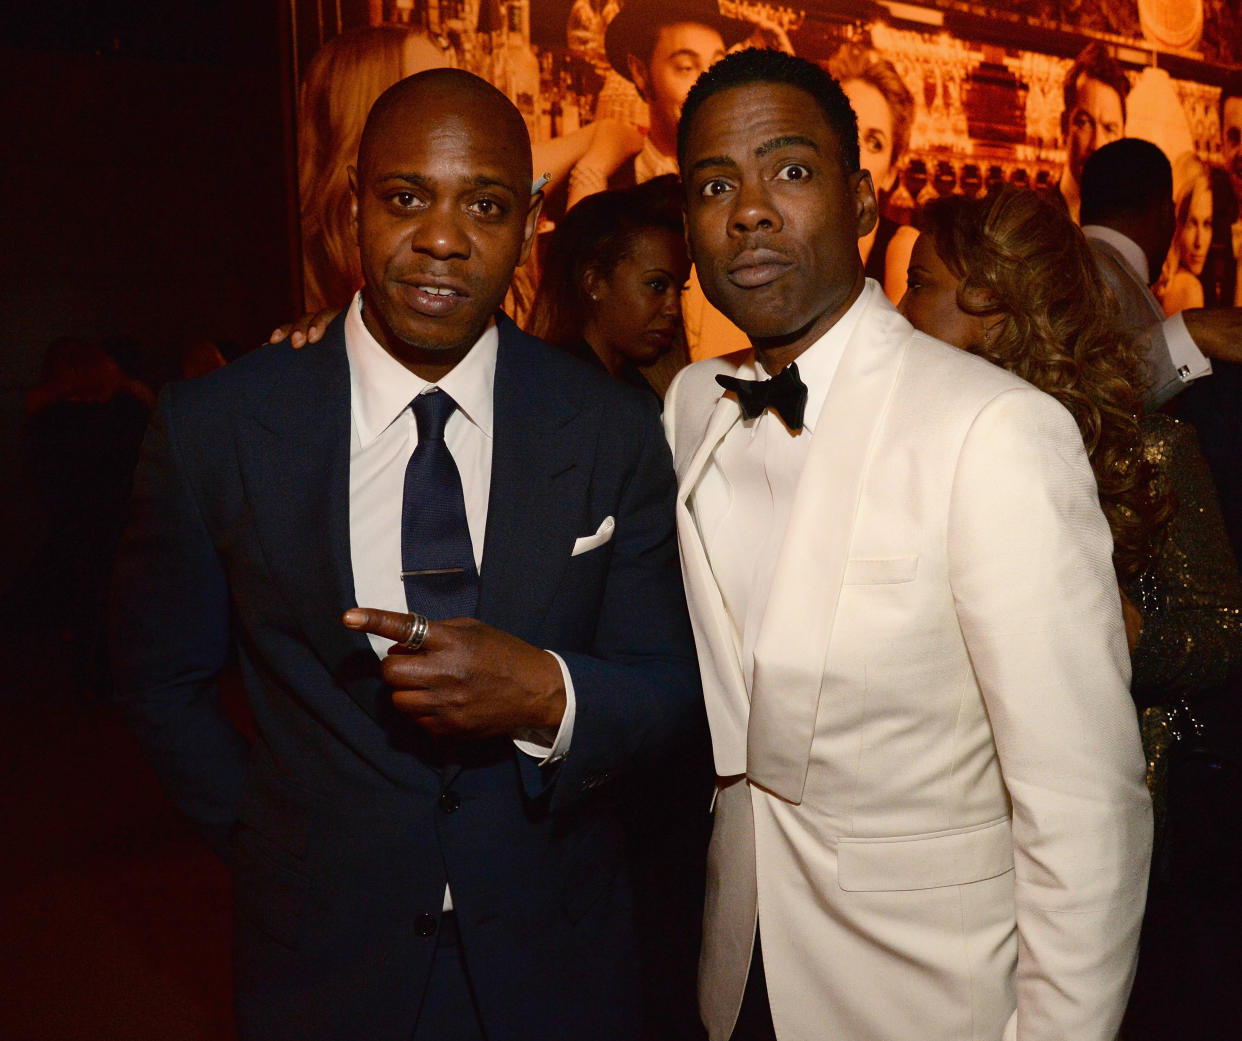 Comedians Dave Chappelle and Chris Rock joke about their recent onstage assaults